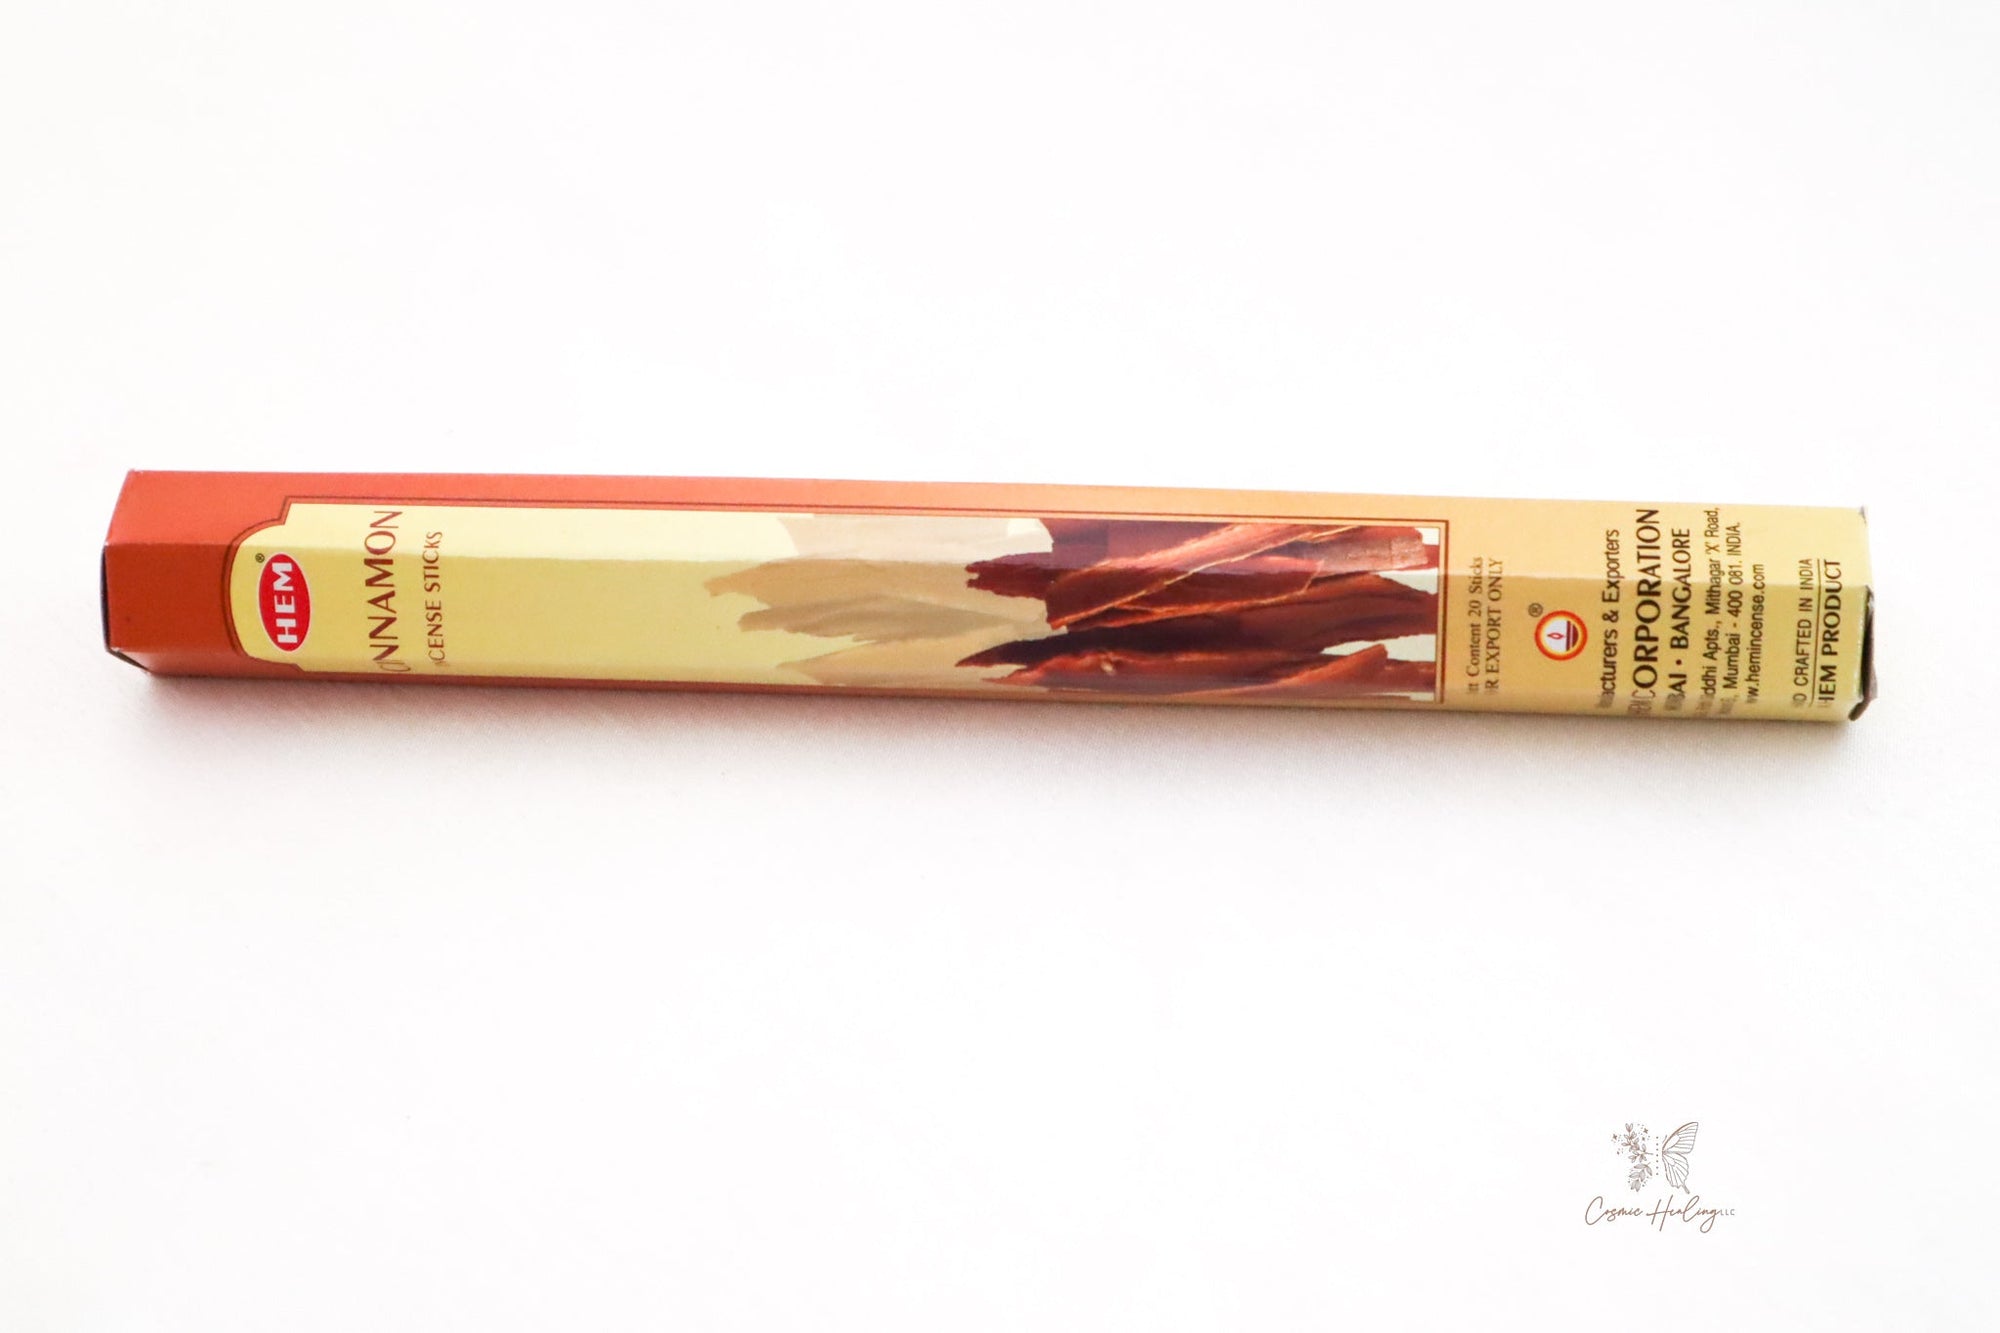 Cinnamon Incense 20 Sticks-HEM (Incienso Canela) for money drawing, luck, and love - Shop Cosmic Healing